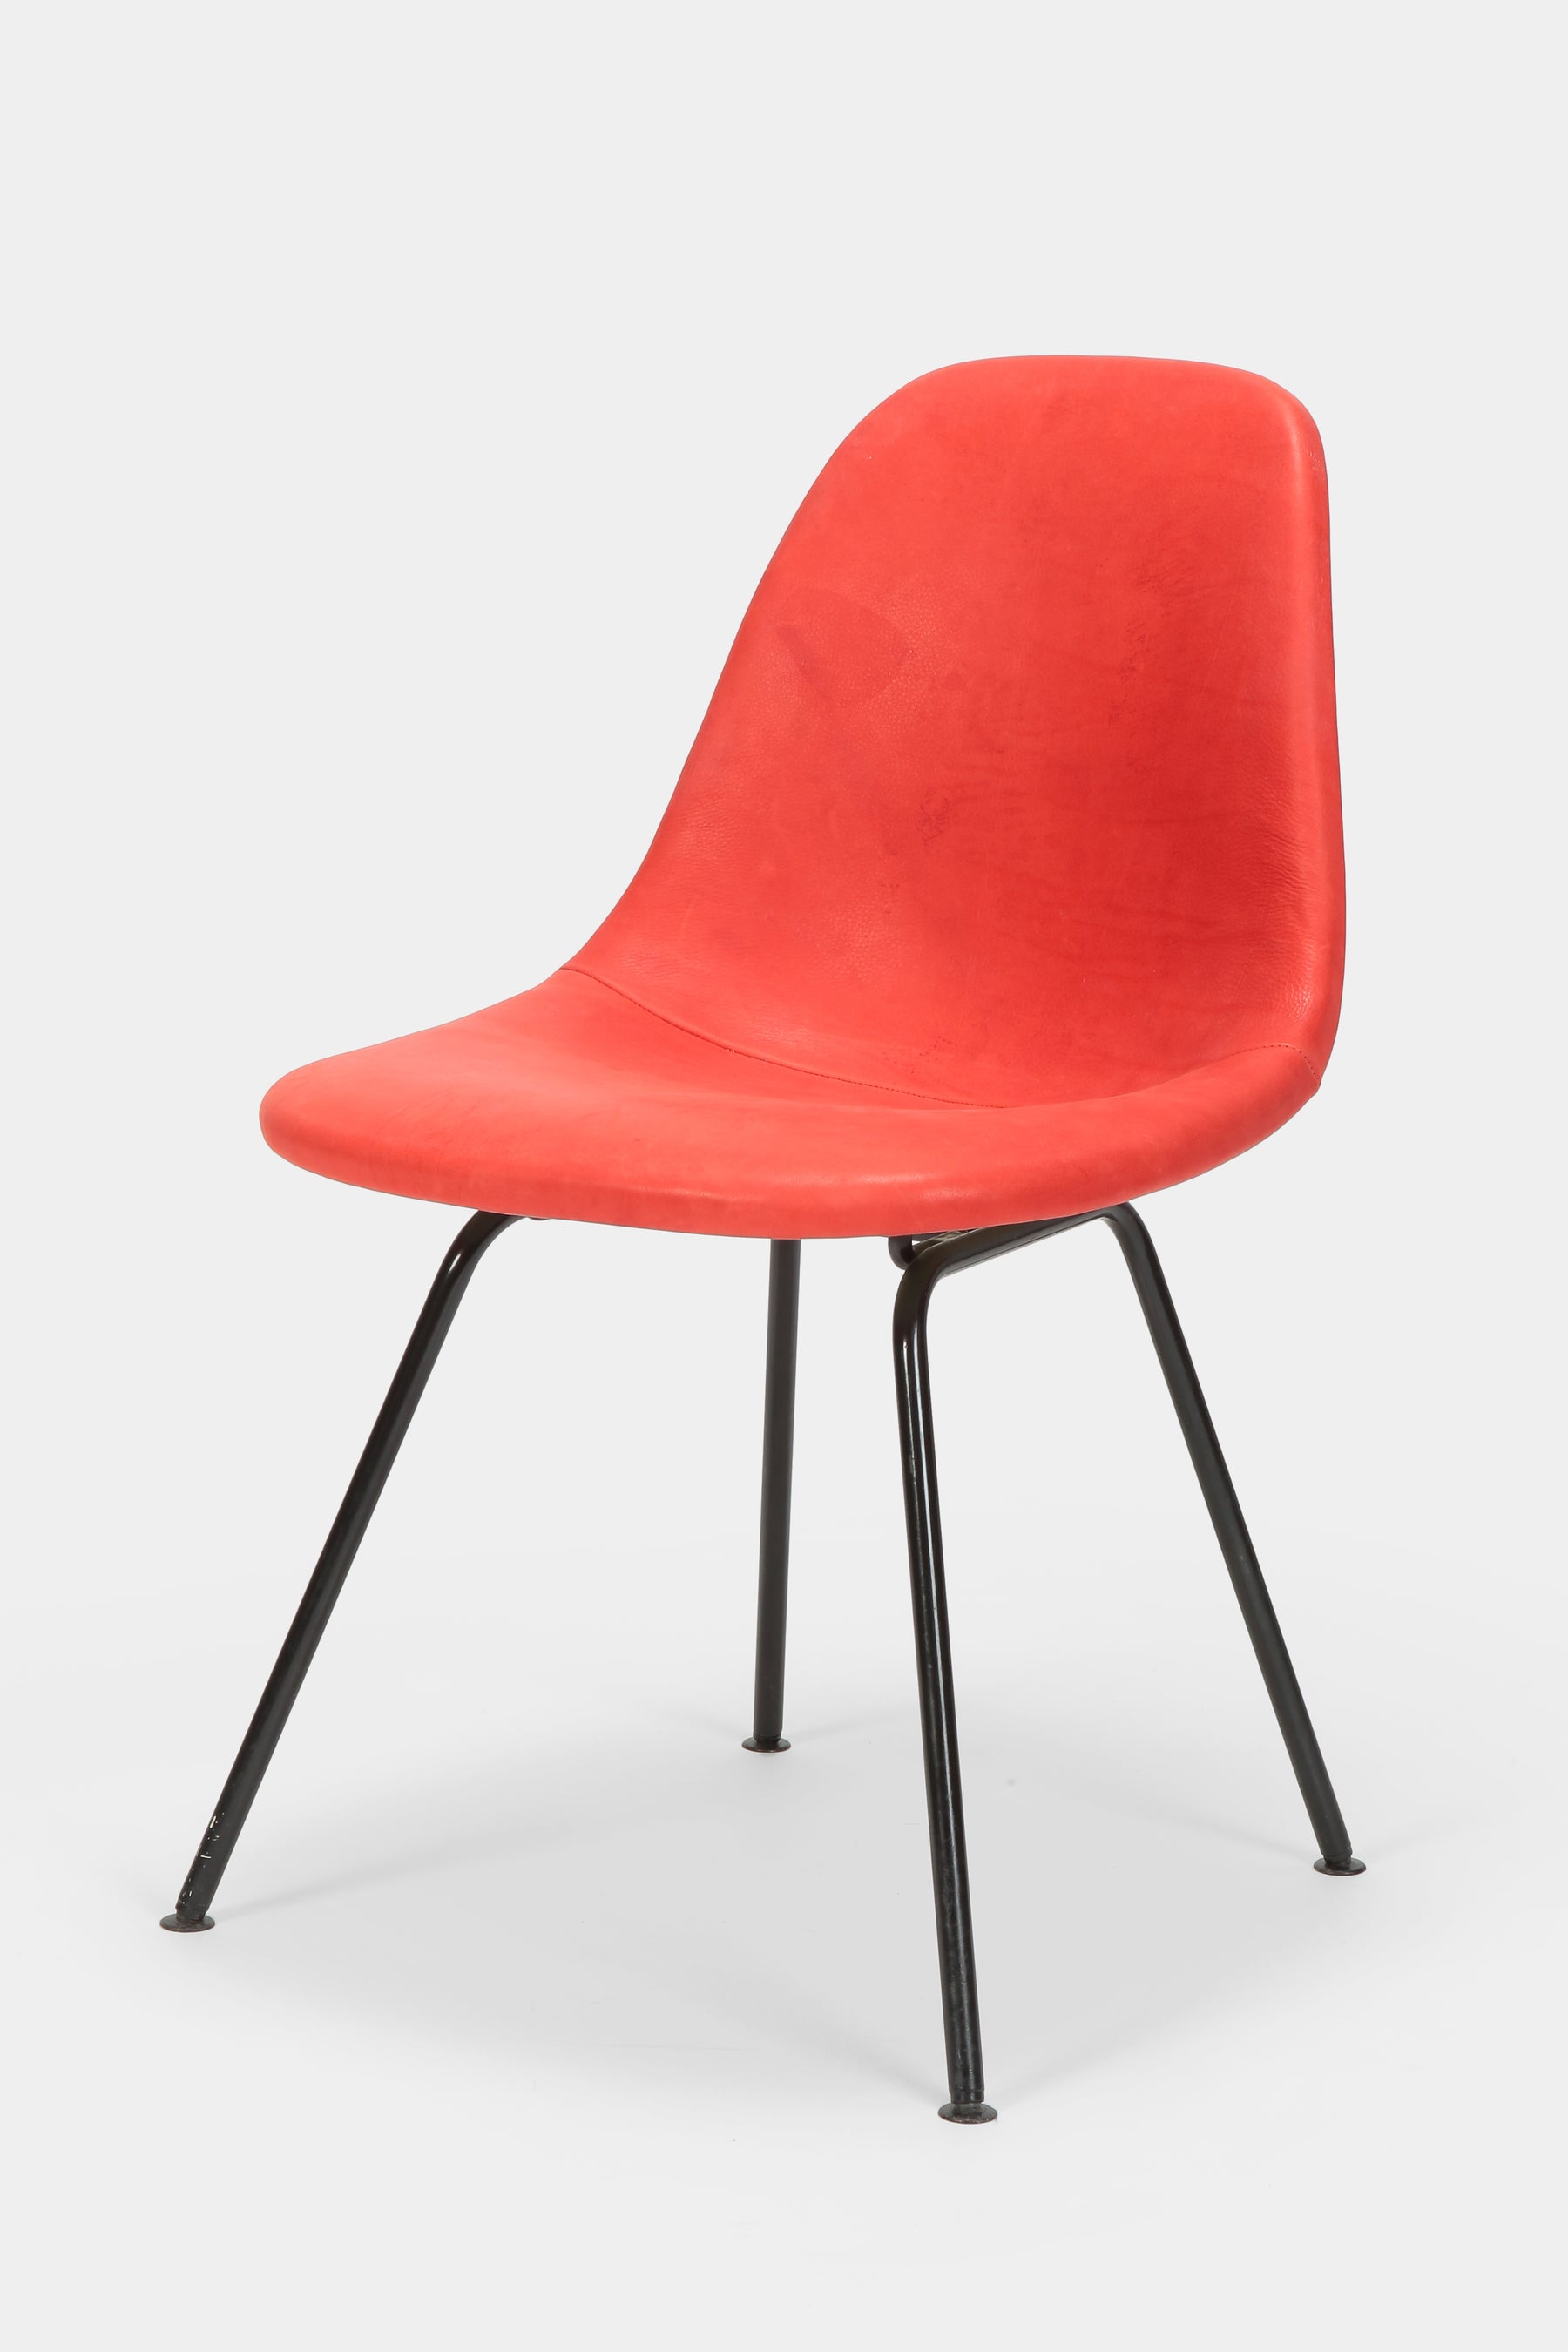 stuhl-charles-and-ray-eames-60er-rot